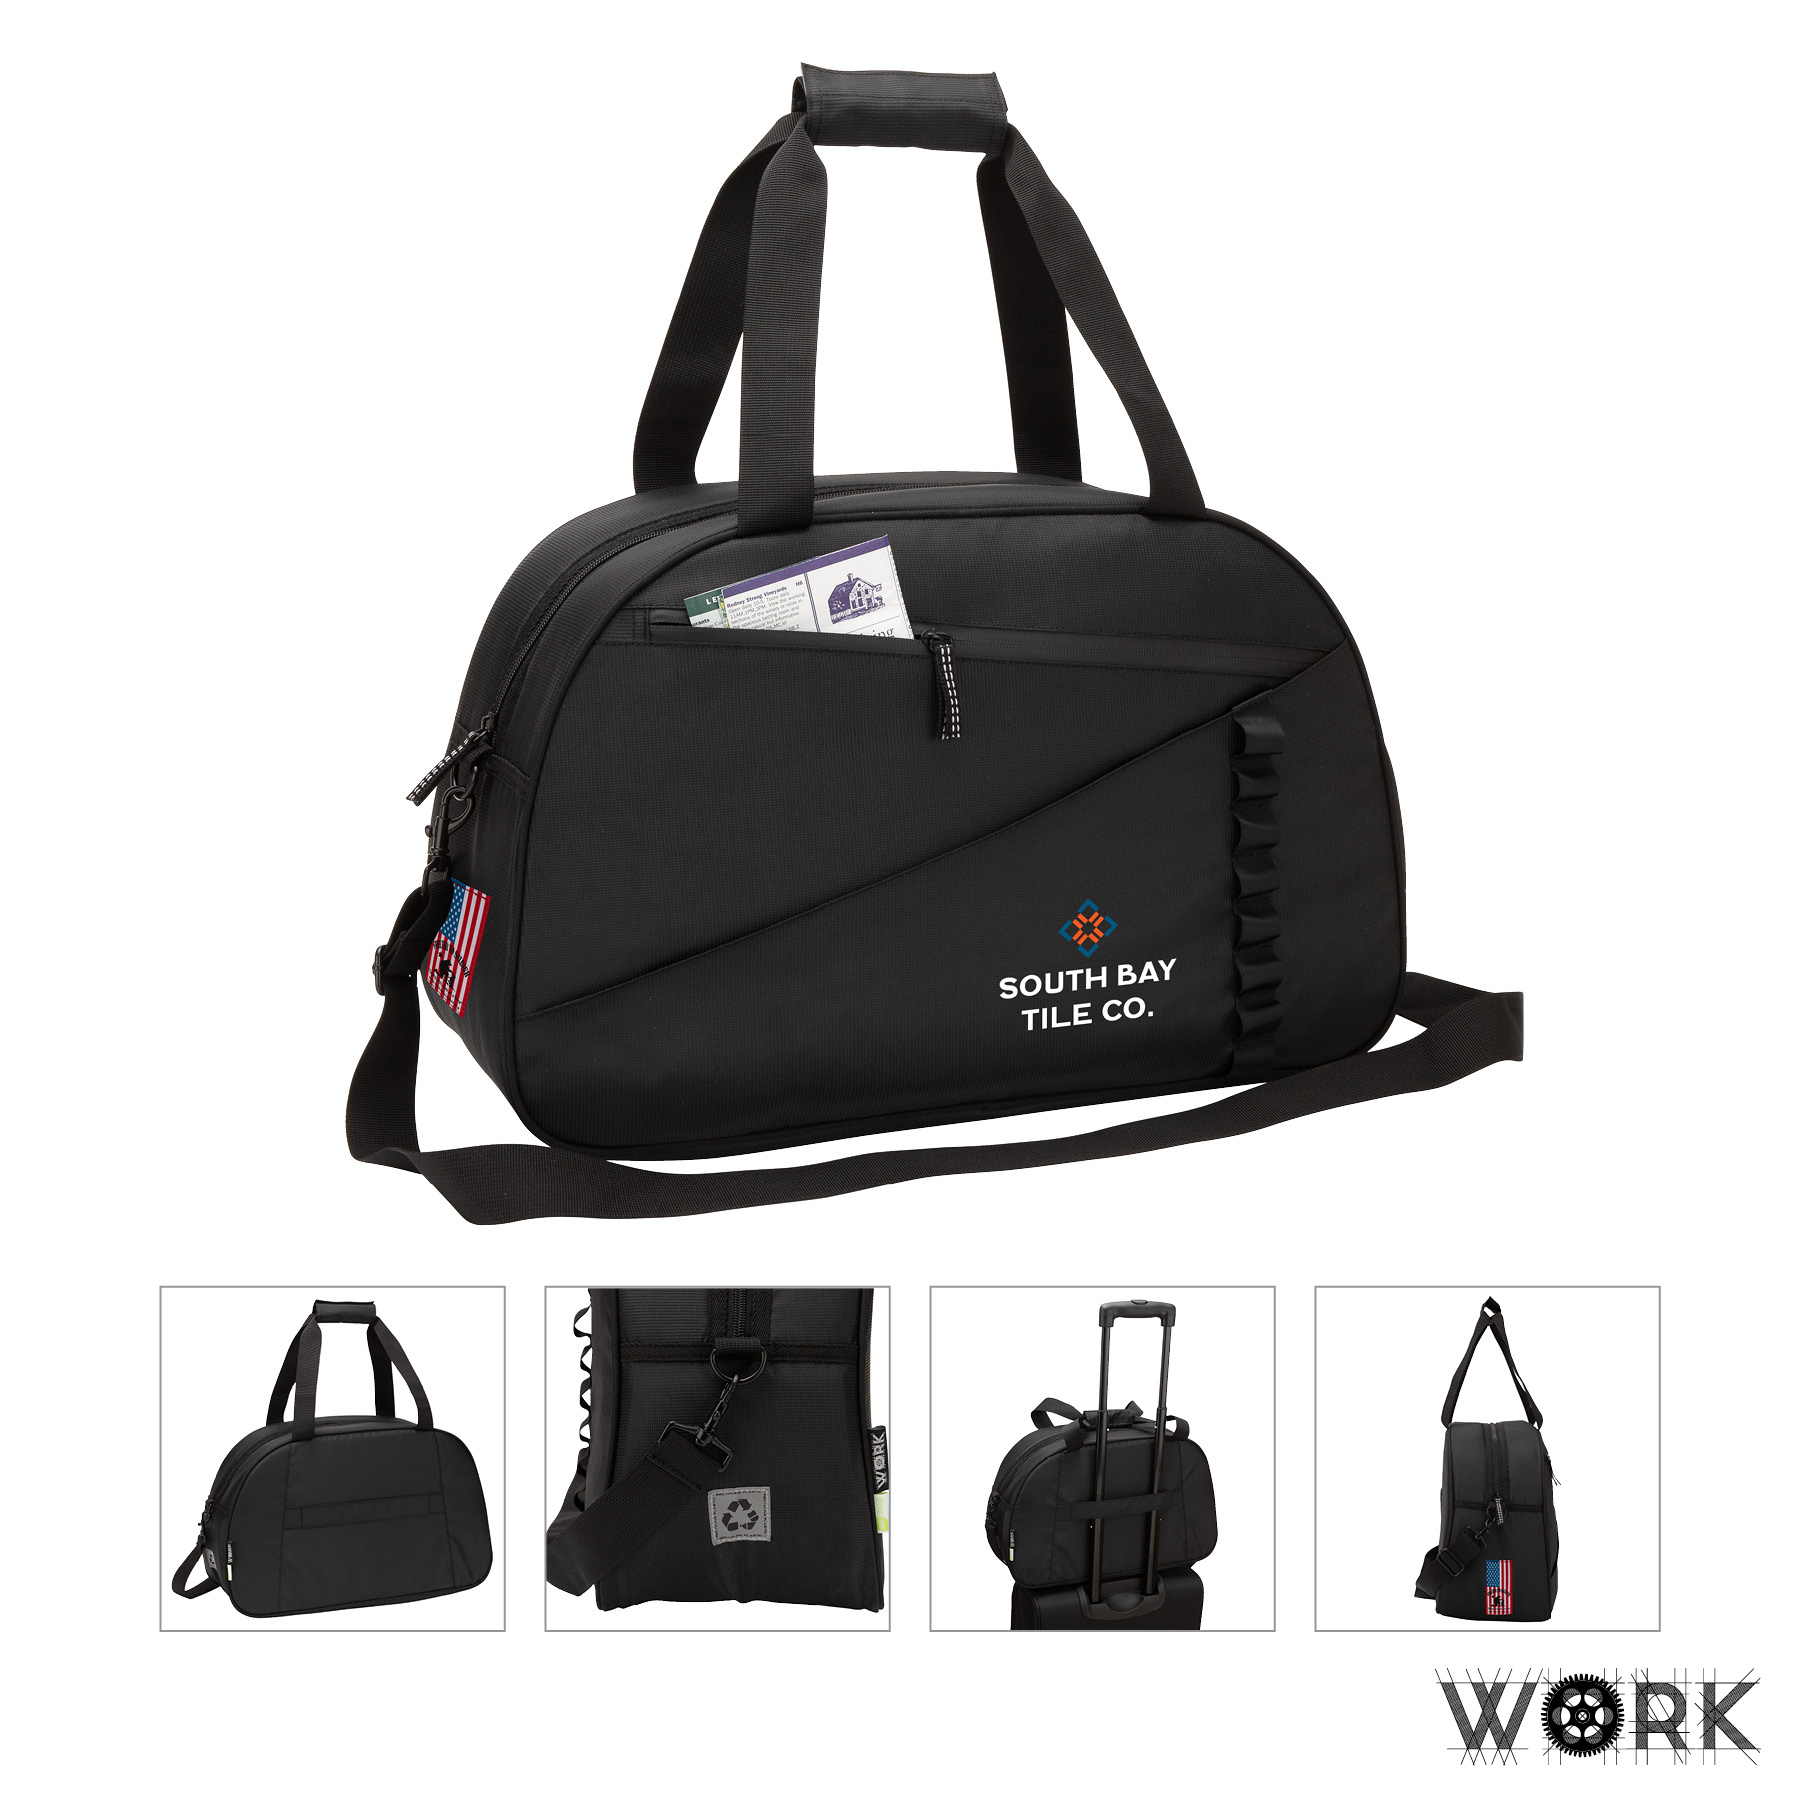 WORK® RPET Recycled Duffle Bag